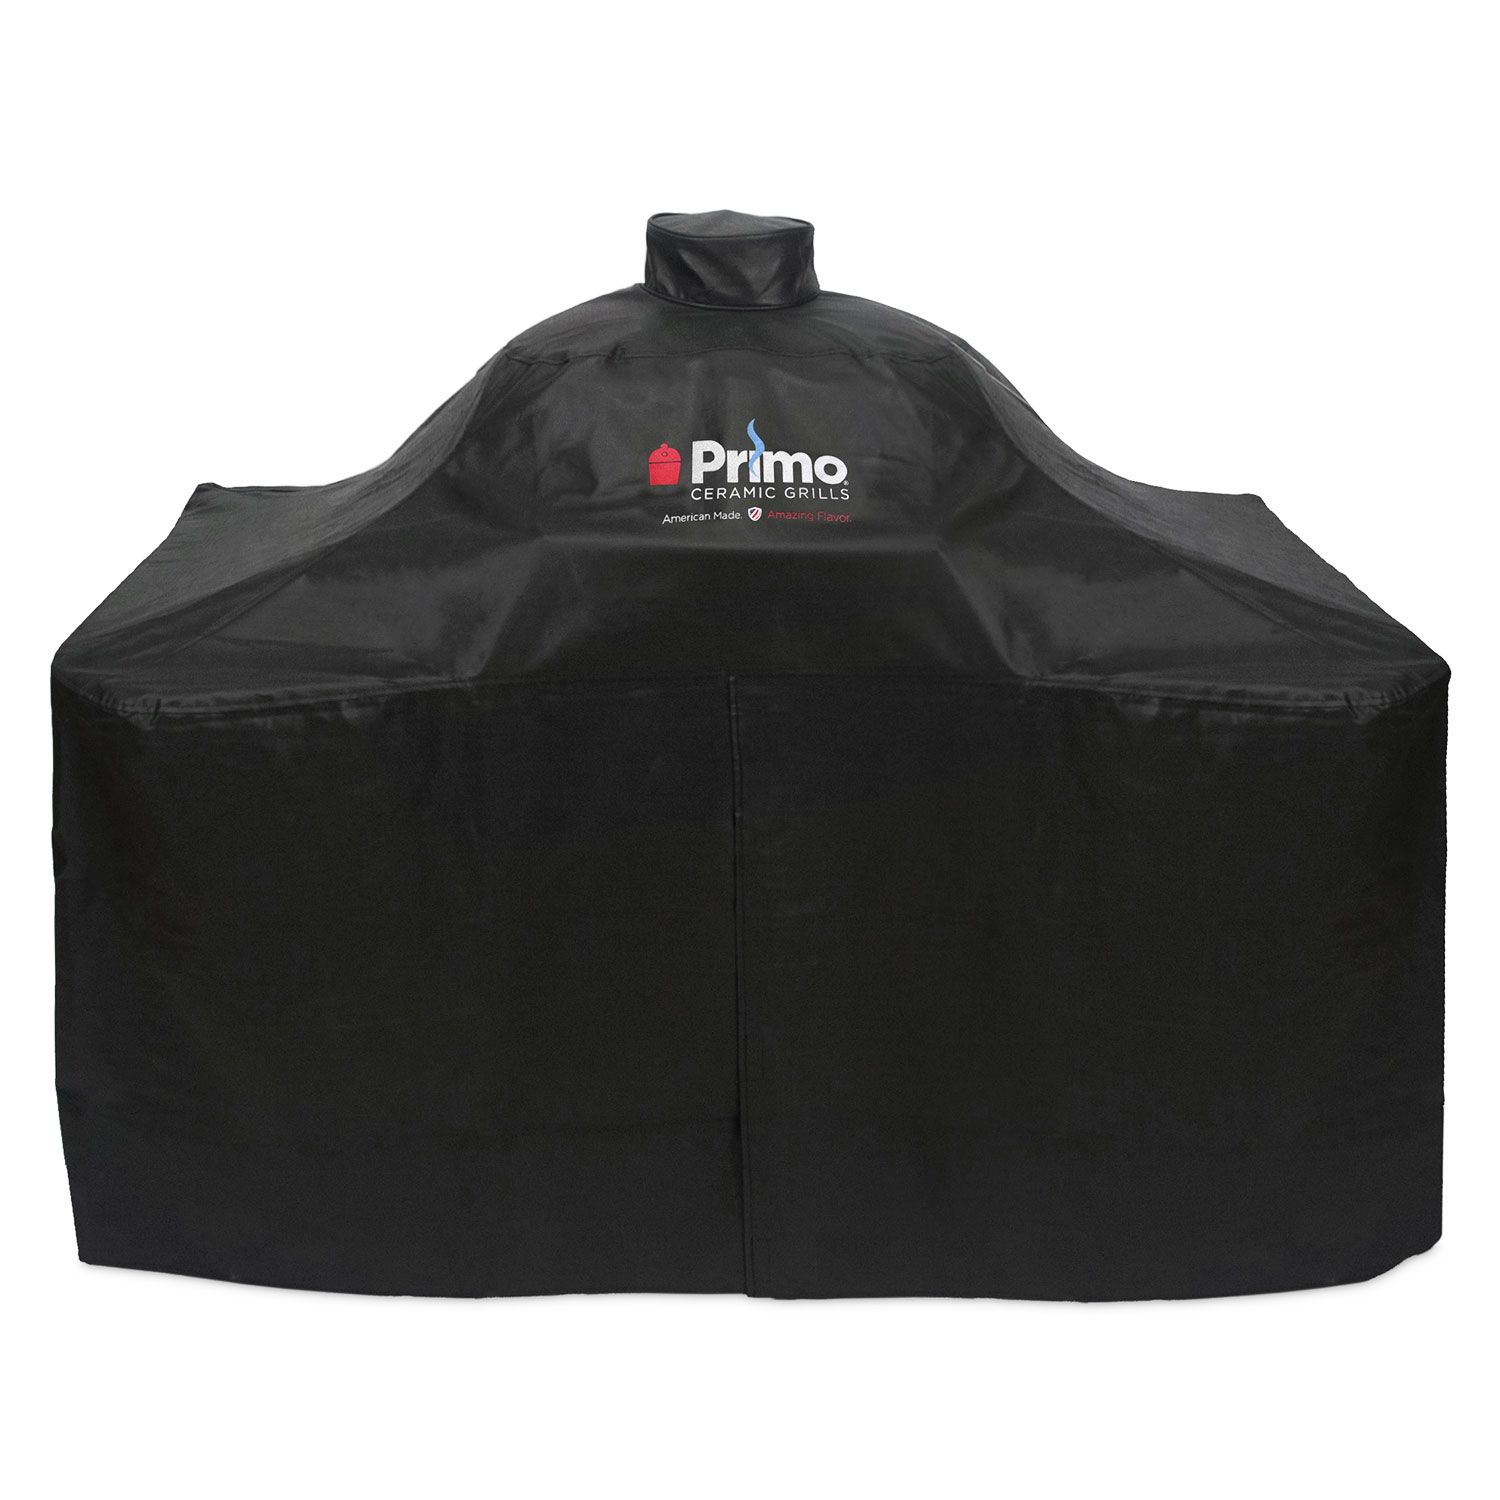 Primo XL 400 Or Kamado In Table Grill Cover